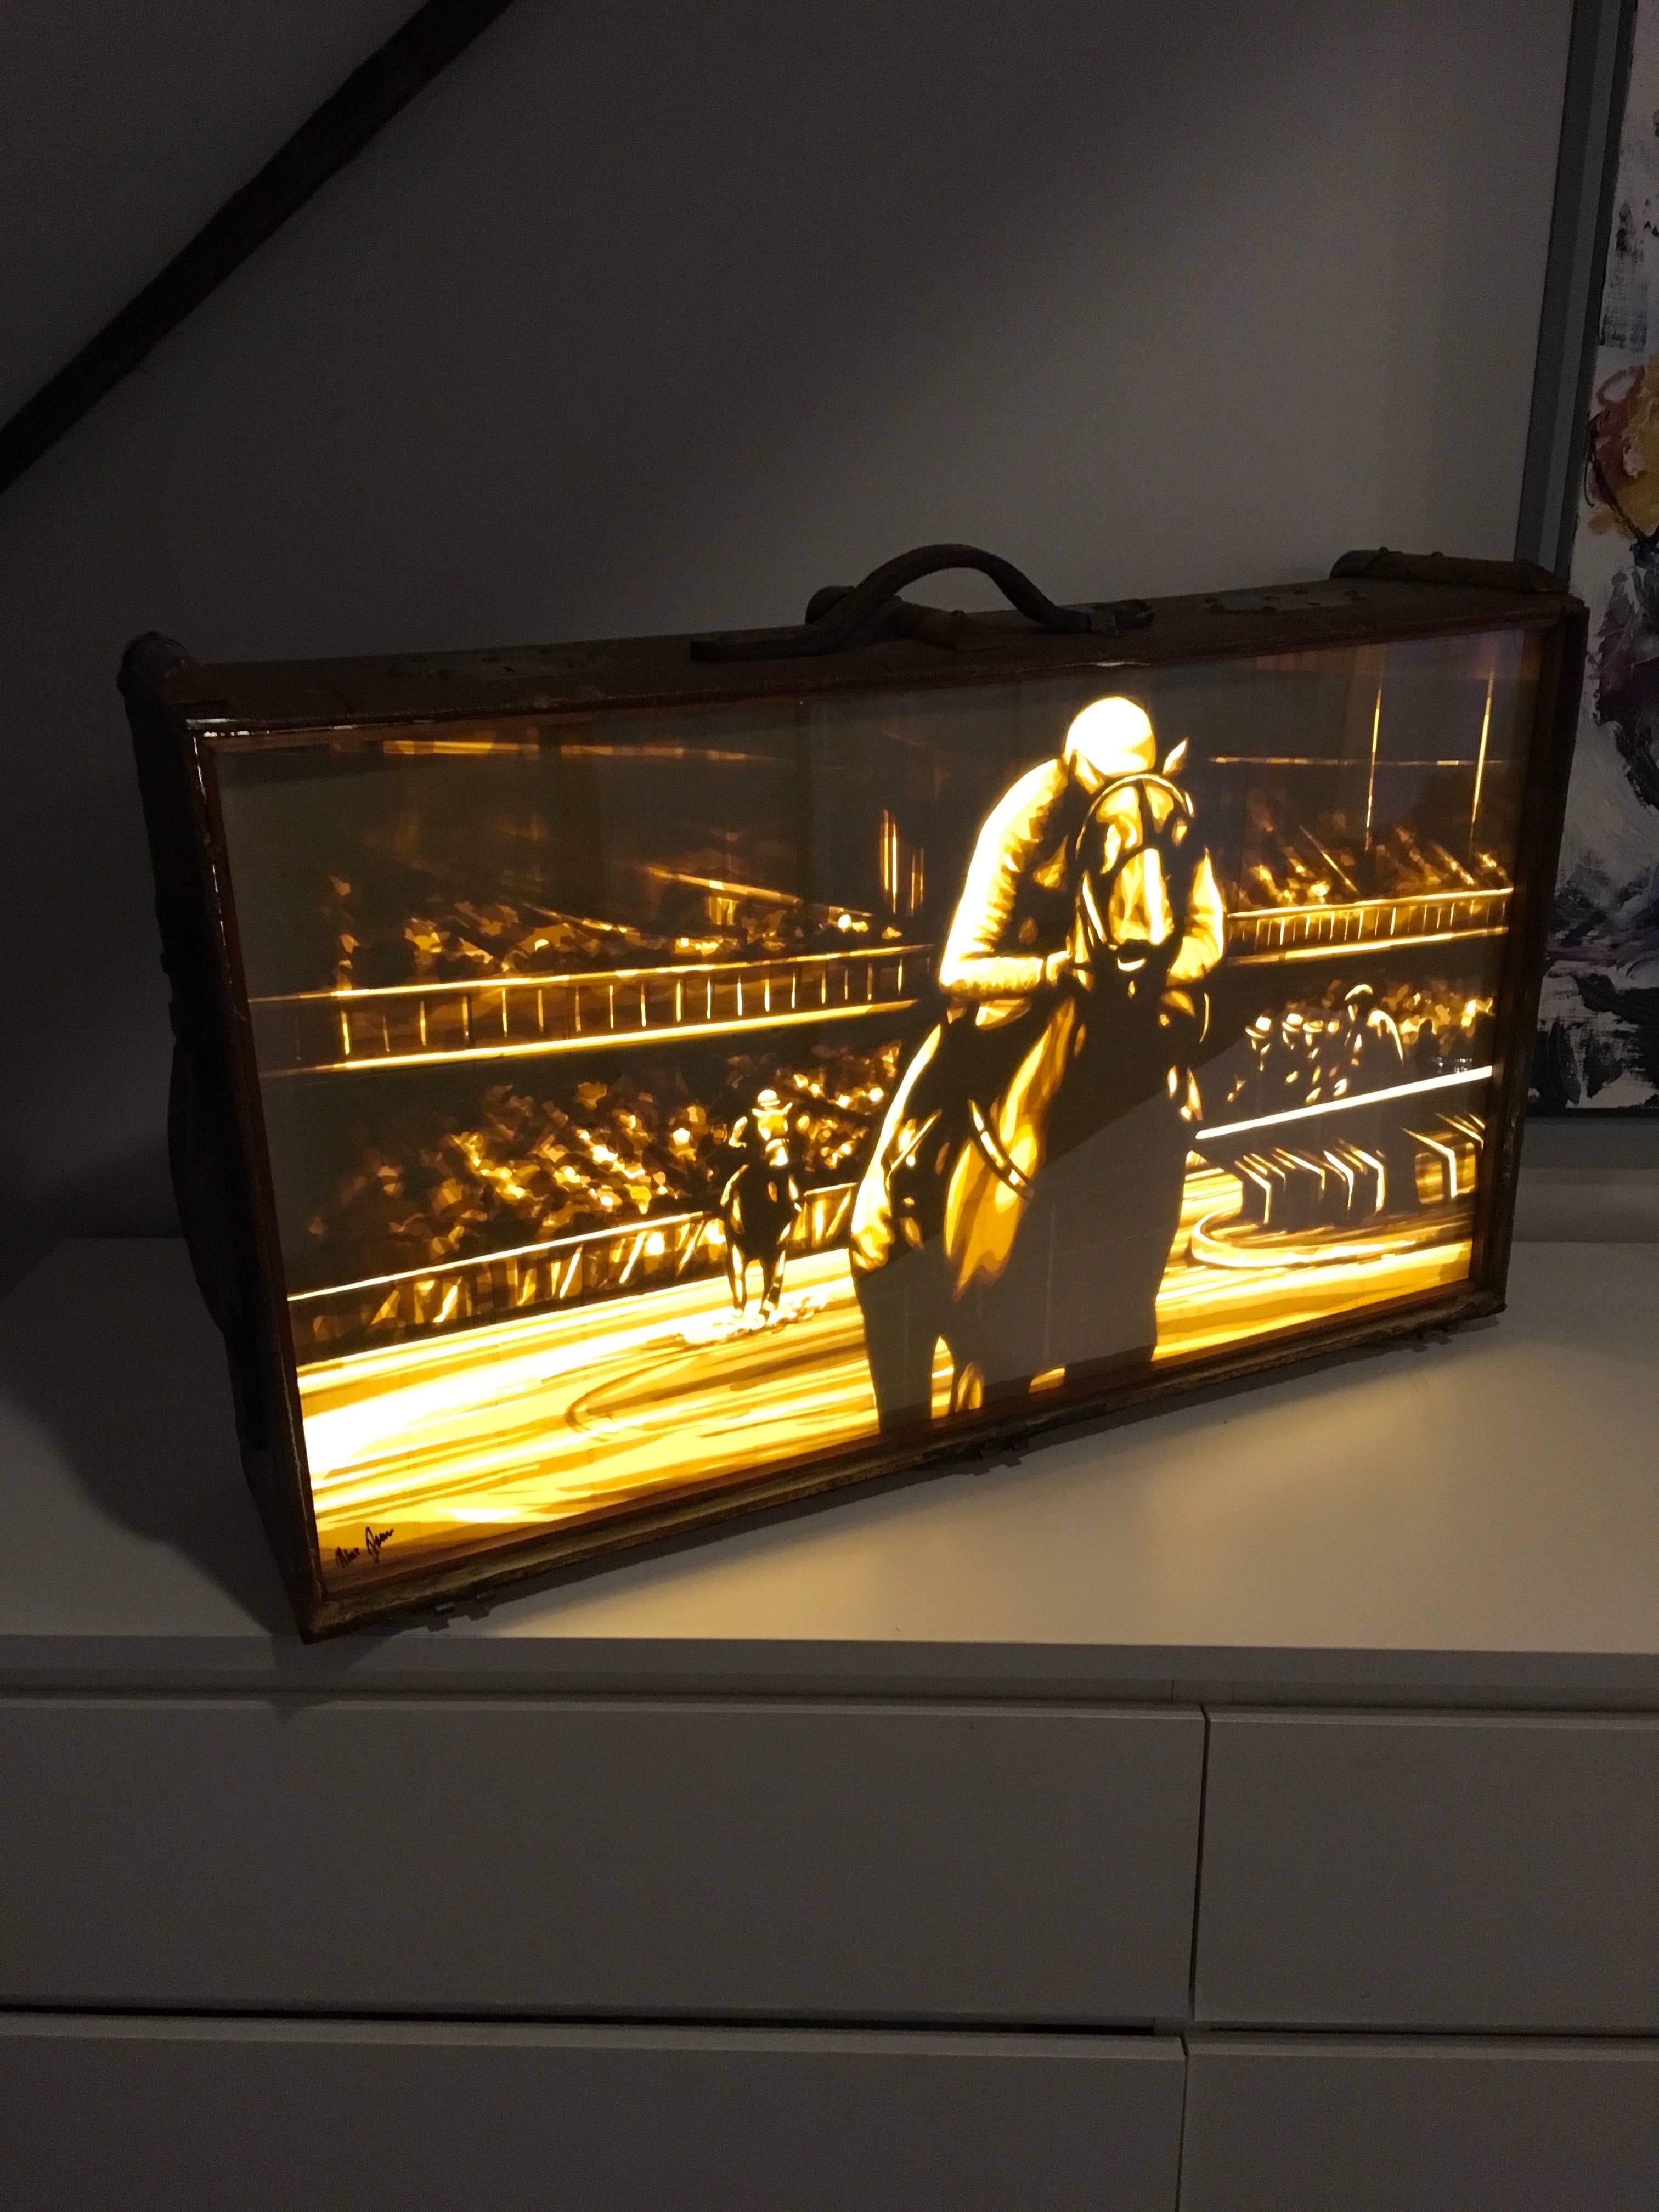 Brown packing tape on acrylic glass Framed in customized LED lightbox
antique suitcase

I have always being a fan of using the context of a city as the backdrop of art. But I felt that one aspect was underrepresented. Street art that appears at